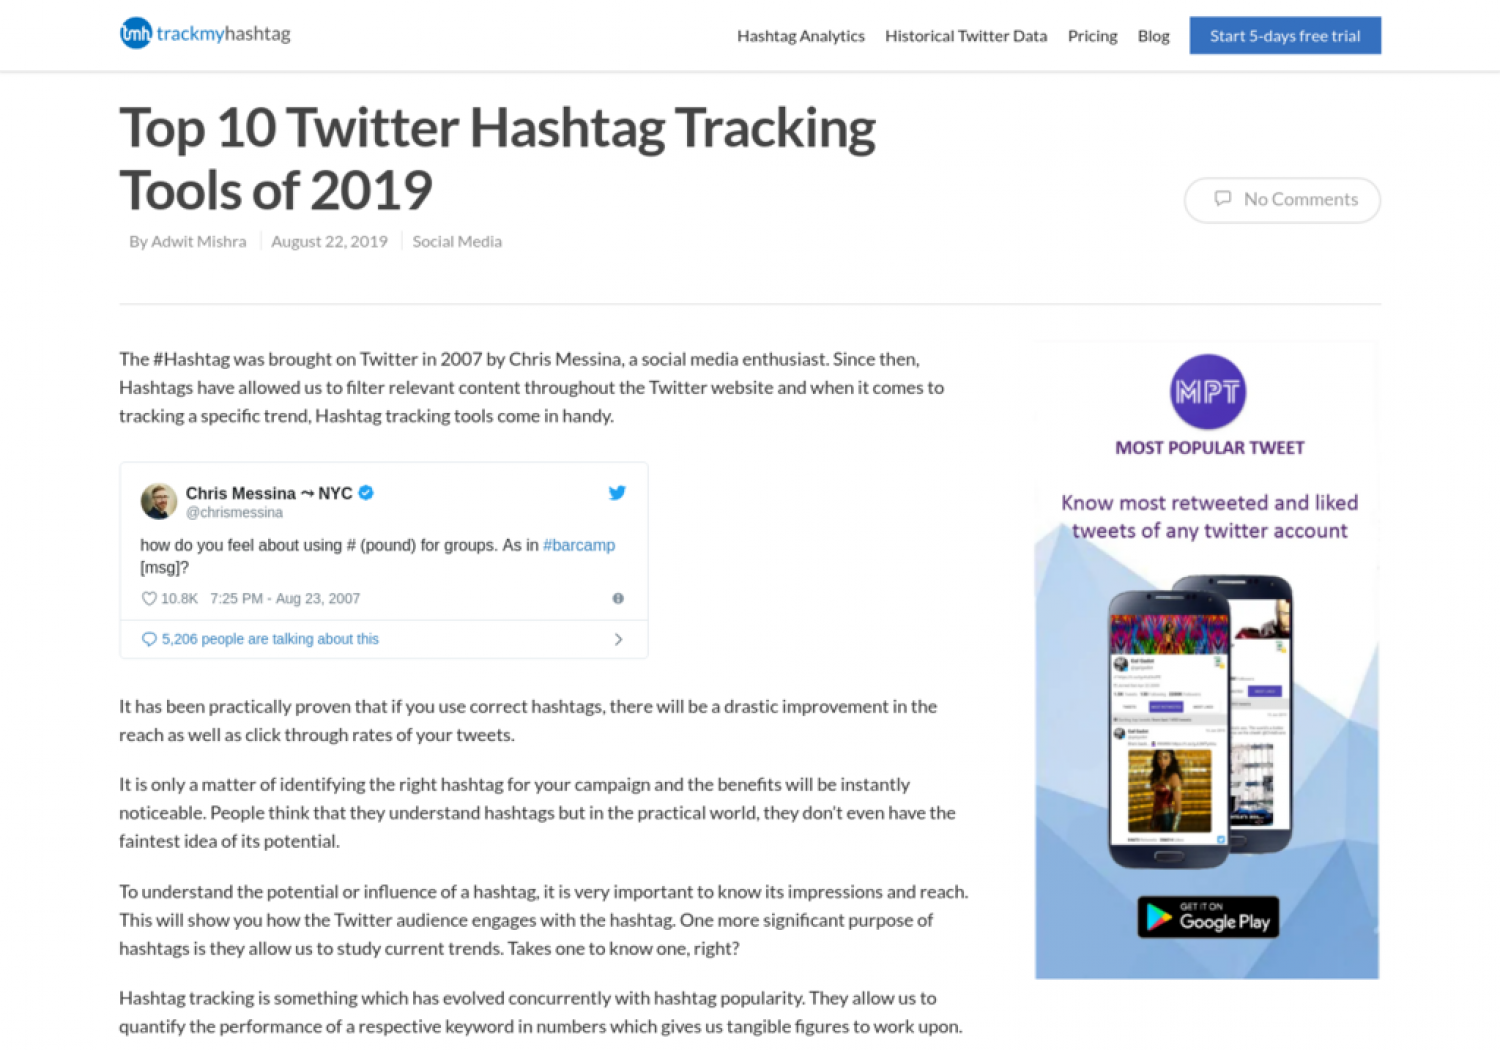 Top 10 Twitter Hashtag Tracking Tools of 2019 Infographic